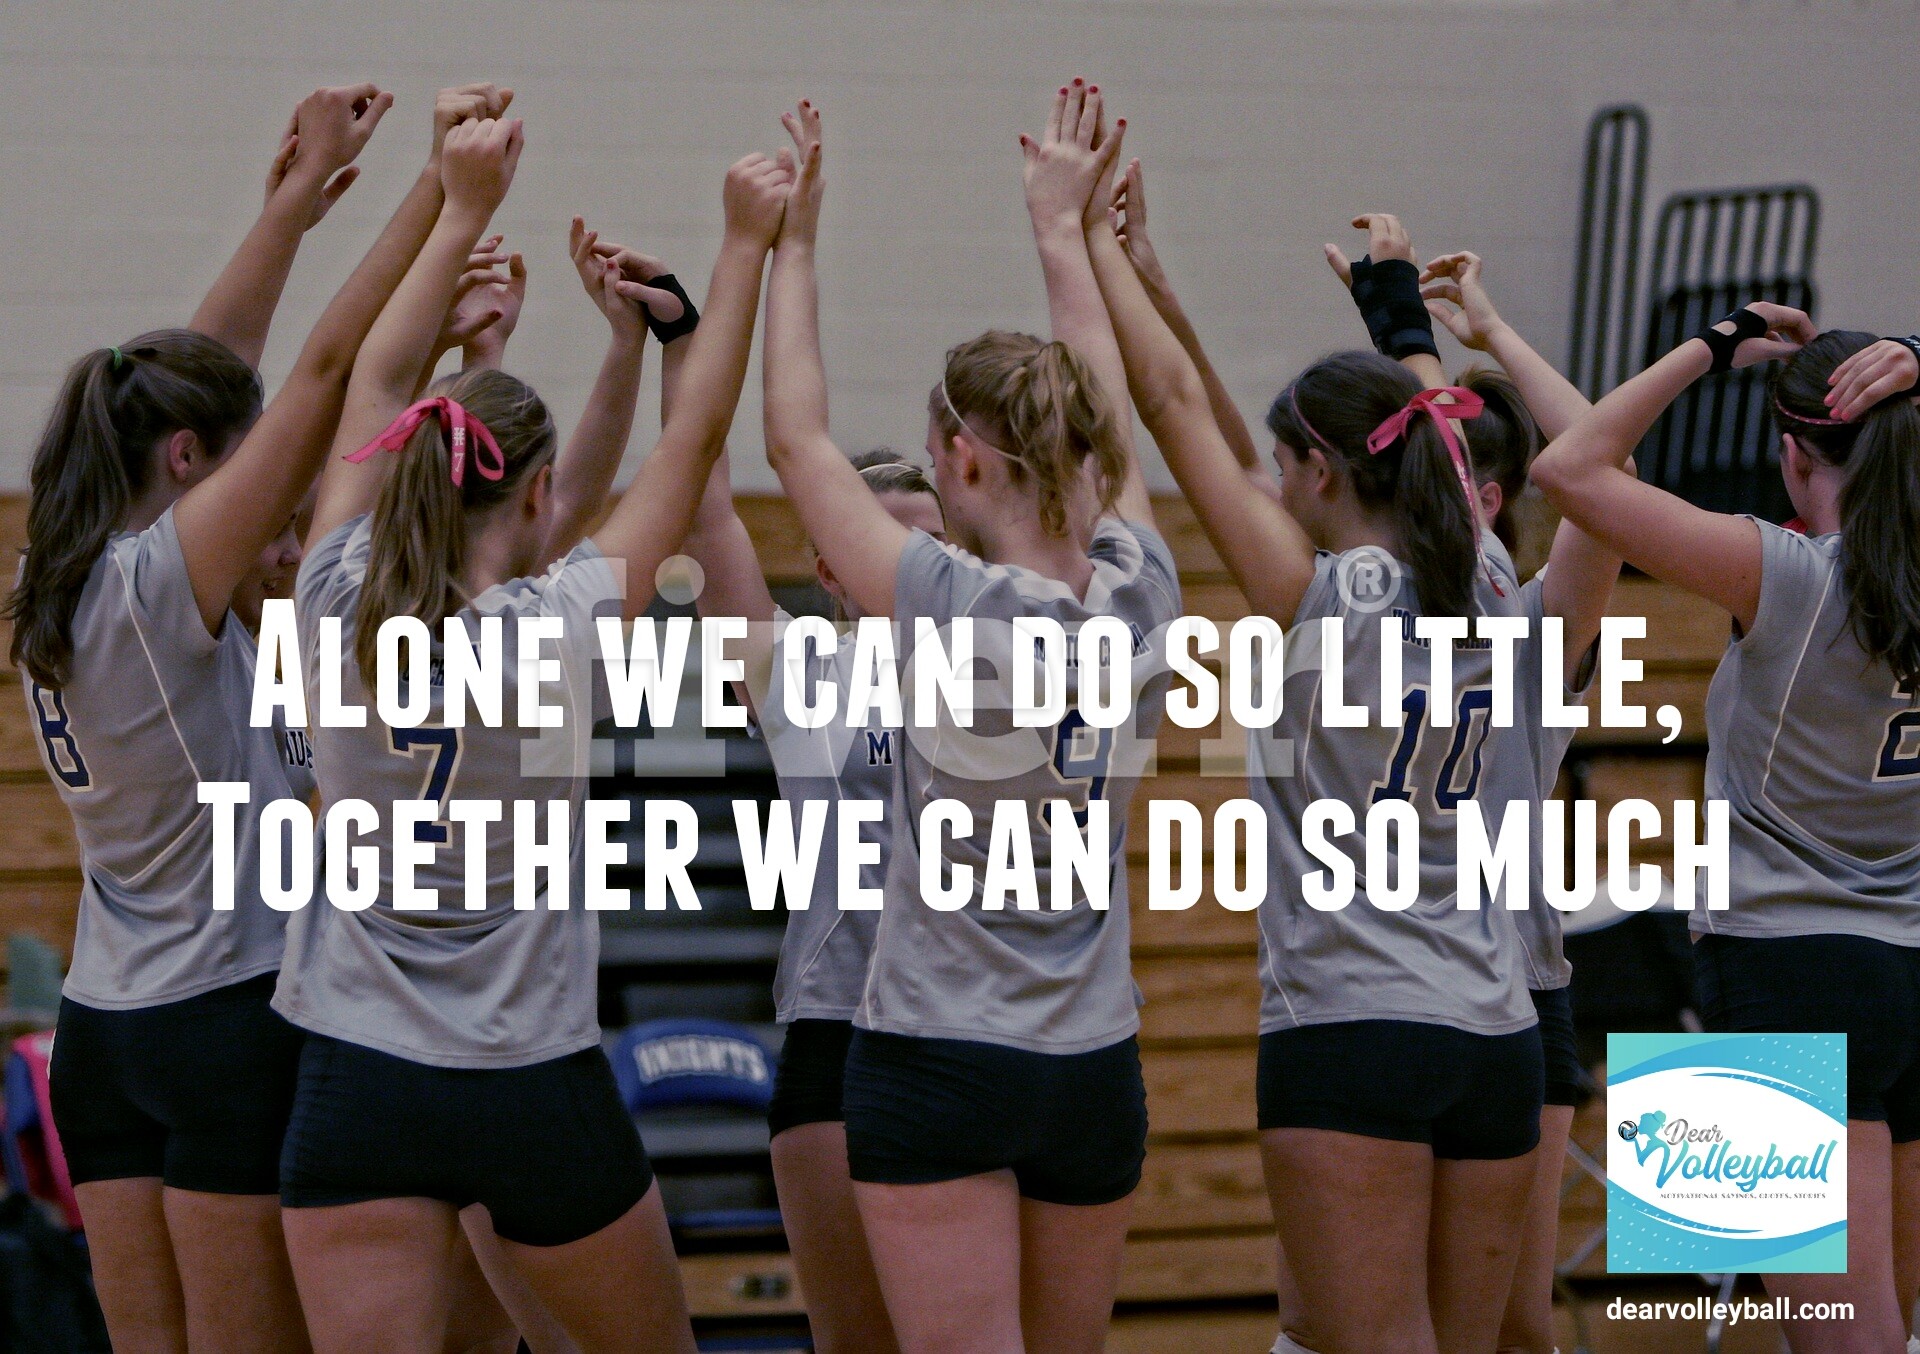 Alone we can do so little, together we can do so much and other volleyball coach quotes on DearVolleyball.com.